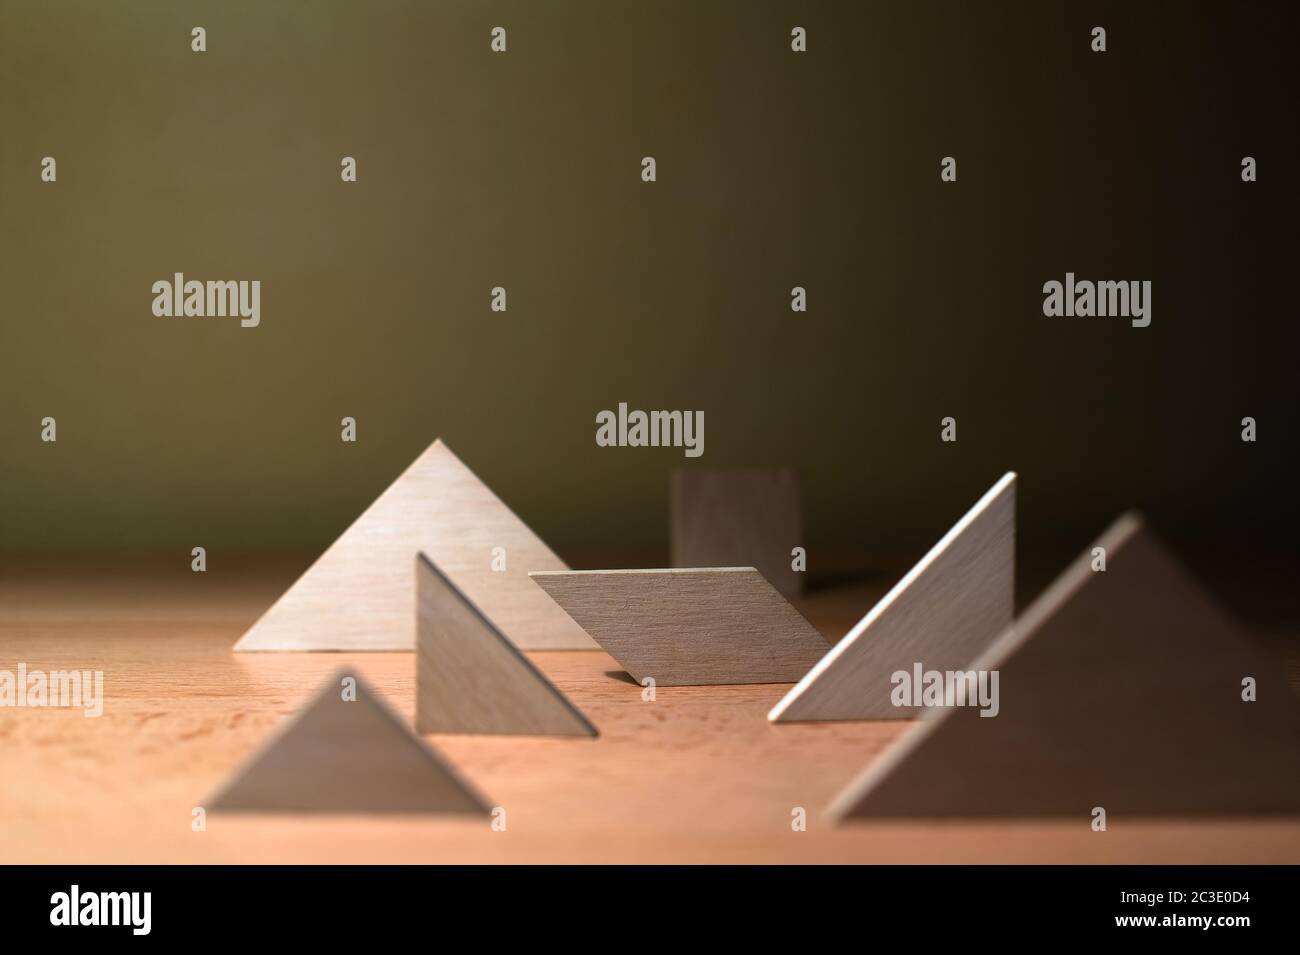 Composition of various geometrical objects - square, triangle, quadrangle - on wooden desk. Shallow depth of field and focus Stock Photo